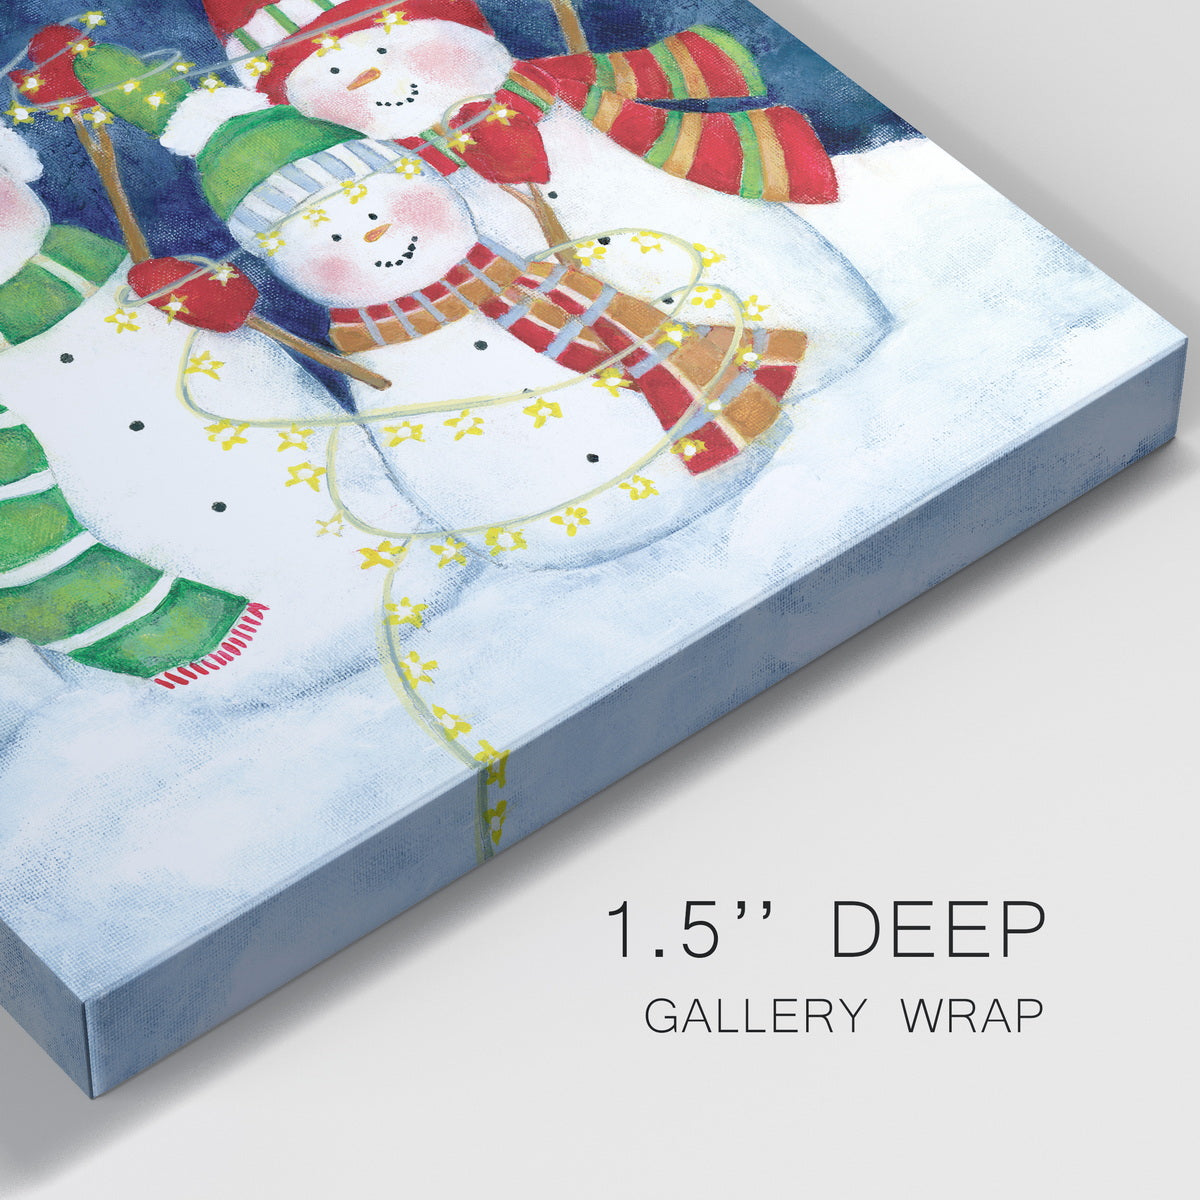 Festive Lights I-Premium Gallery Wrapped Canvas - Ready to Hang